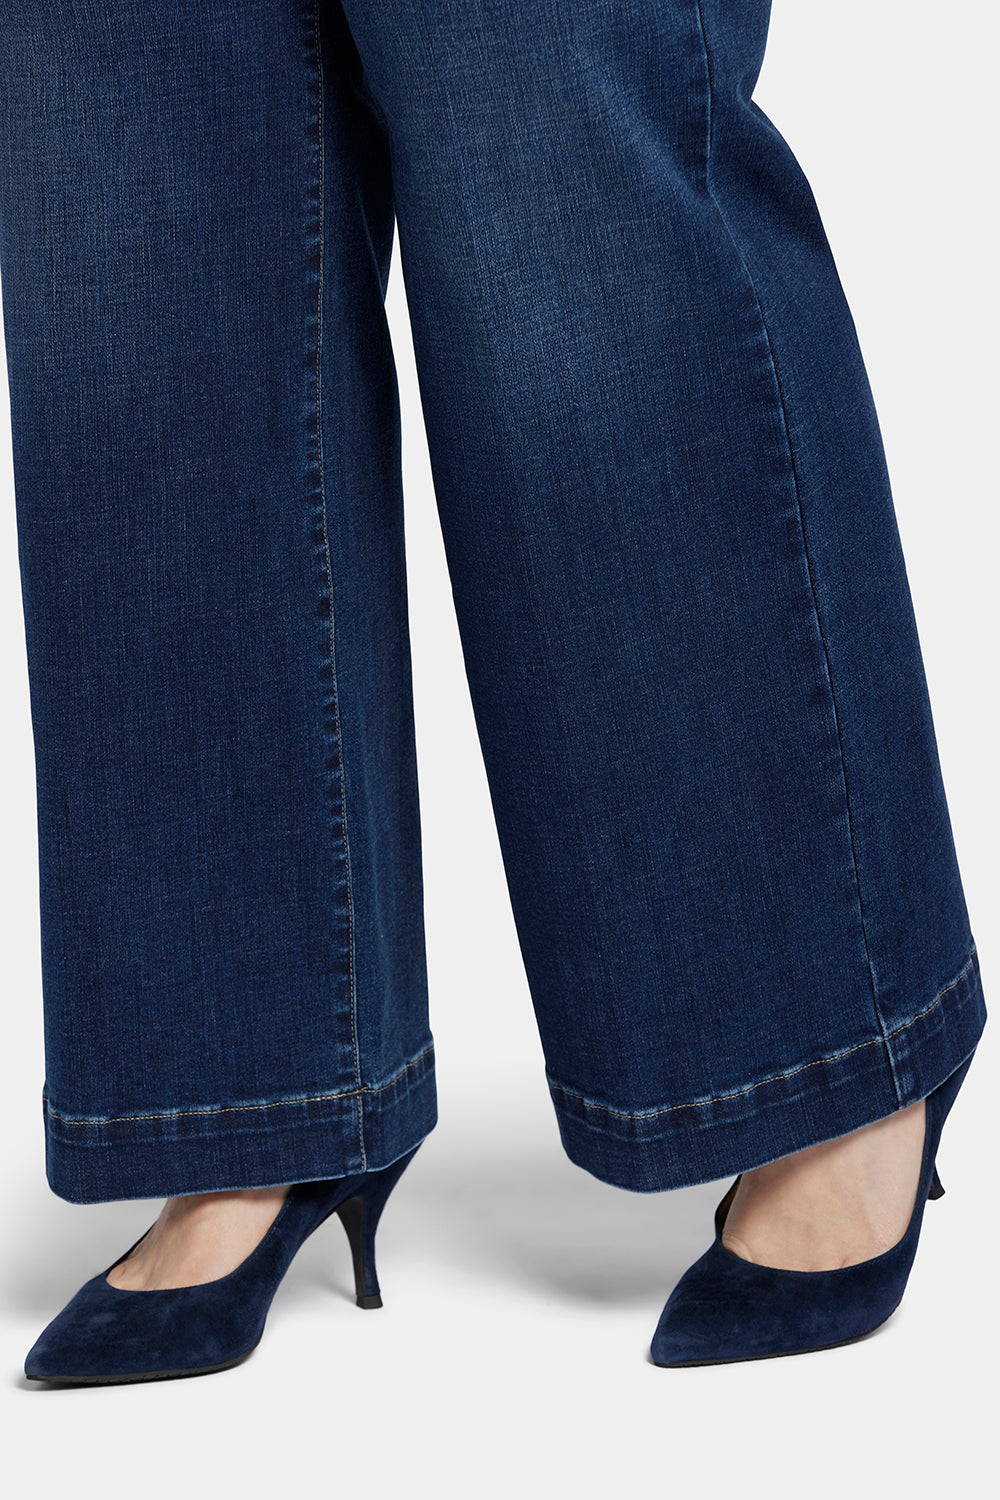 NYDJ Teresa Wide Leg Jeans In Plus Size With 1 1/2